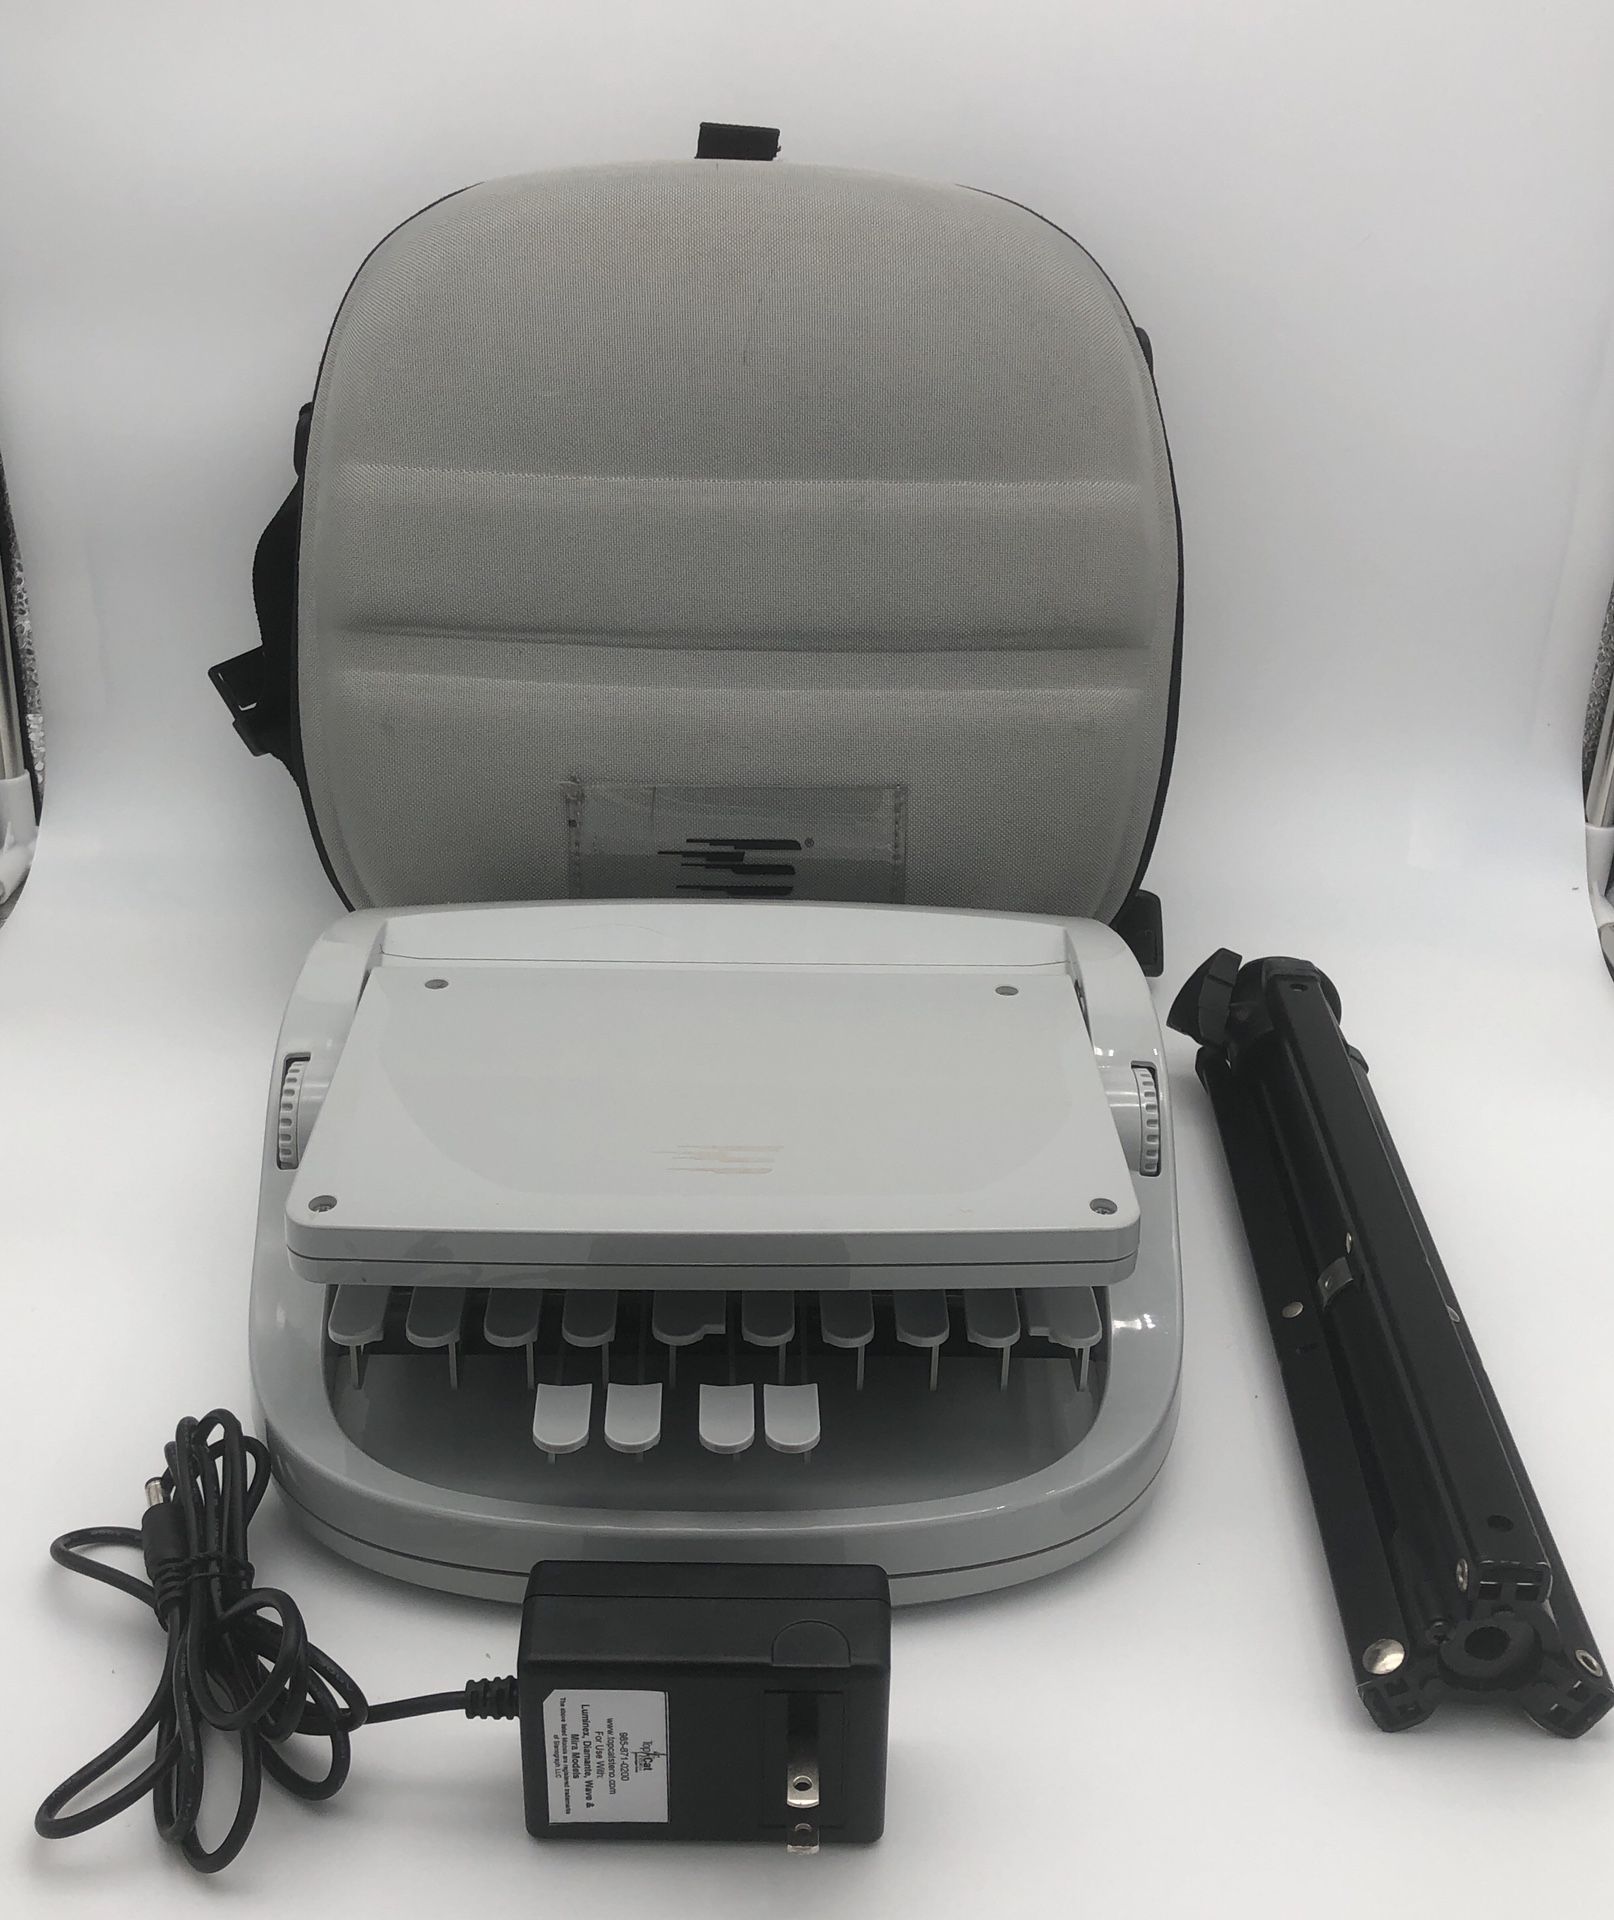 Stenograph Wave Student Writer w/ carrying case, charger and tripod- AS-IS